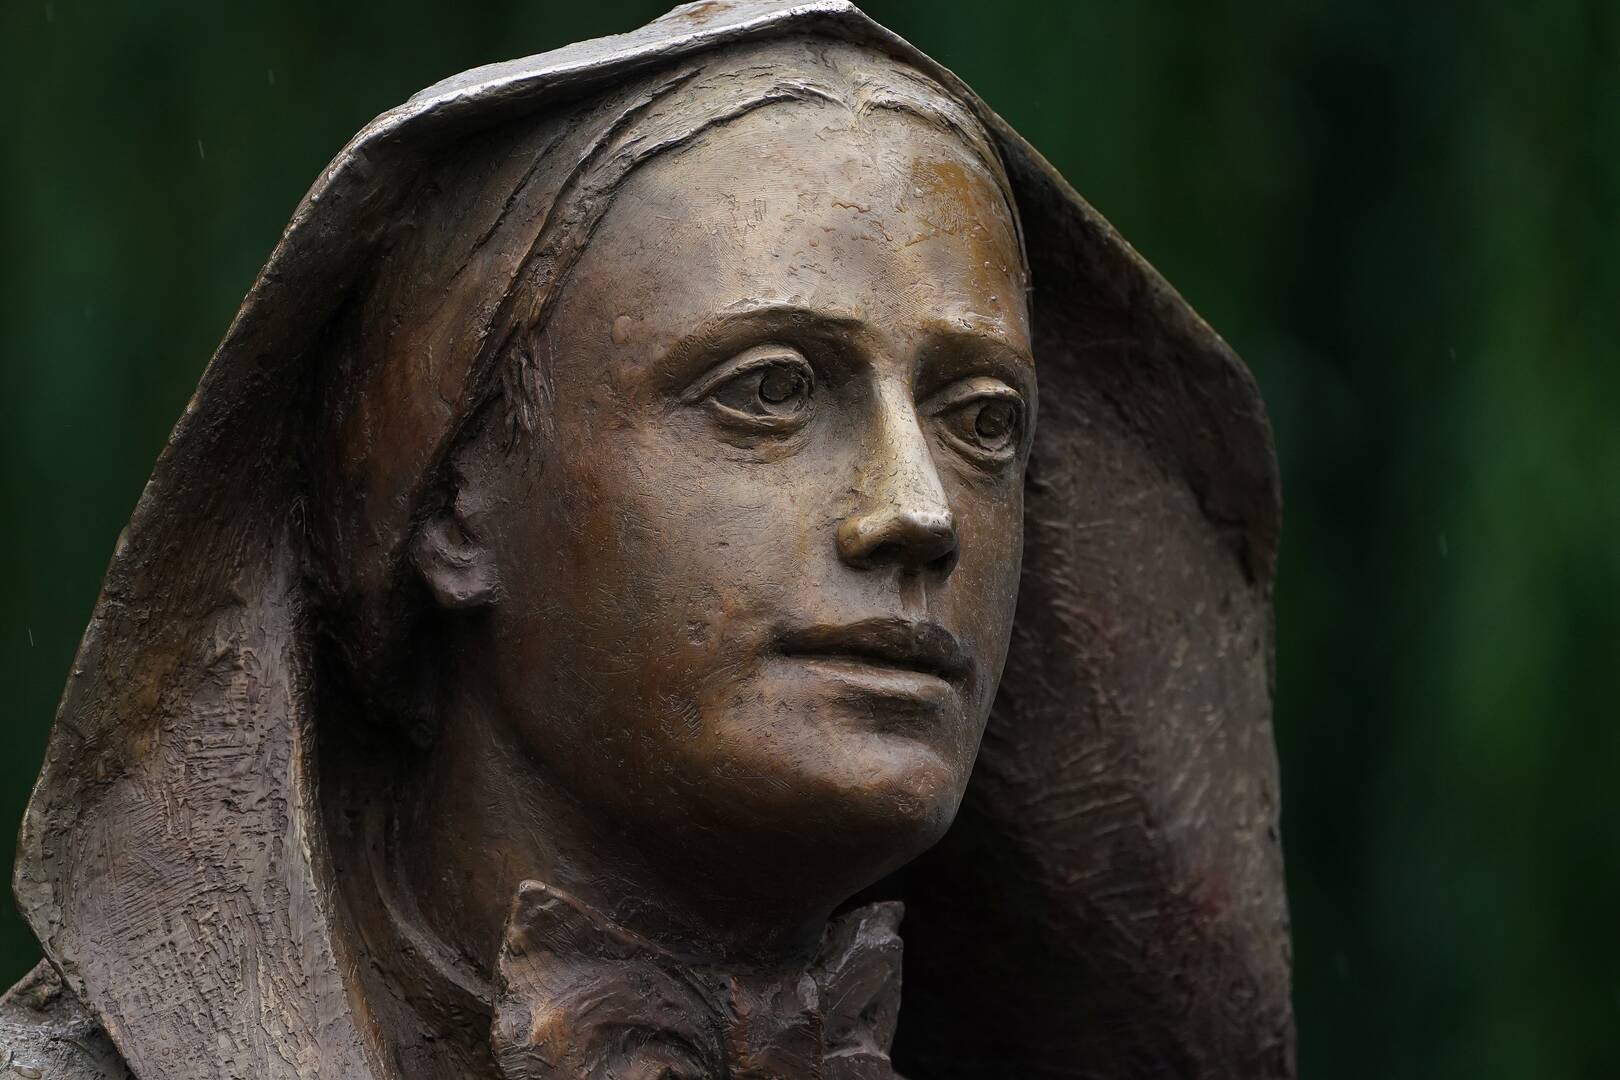 A statue of St. Frances Xavier Cabrini, patron of immigrants, is seen after its unveiling Oct. 12, 2020, in the Manhattan borough of New York City. (CNS photo/Carlo Allegri, Reuters)